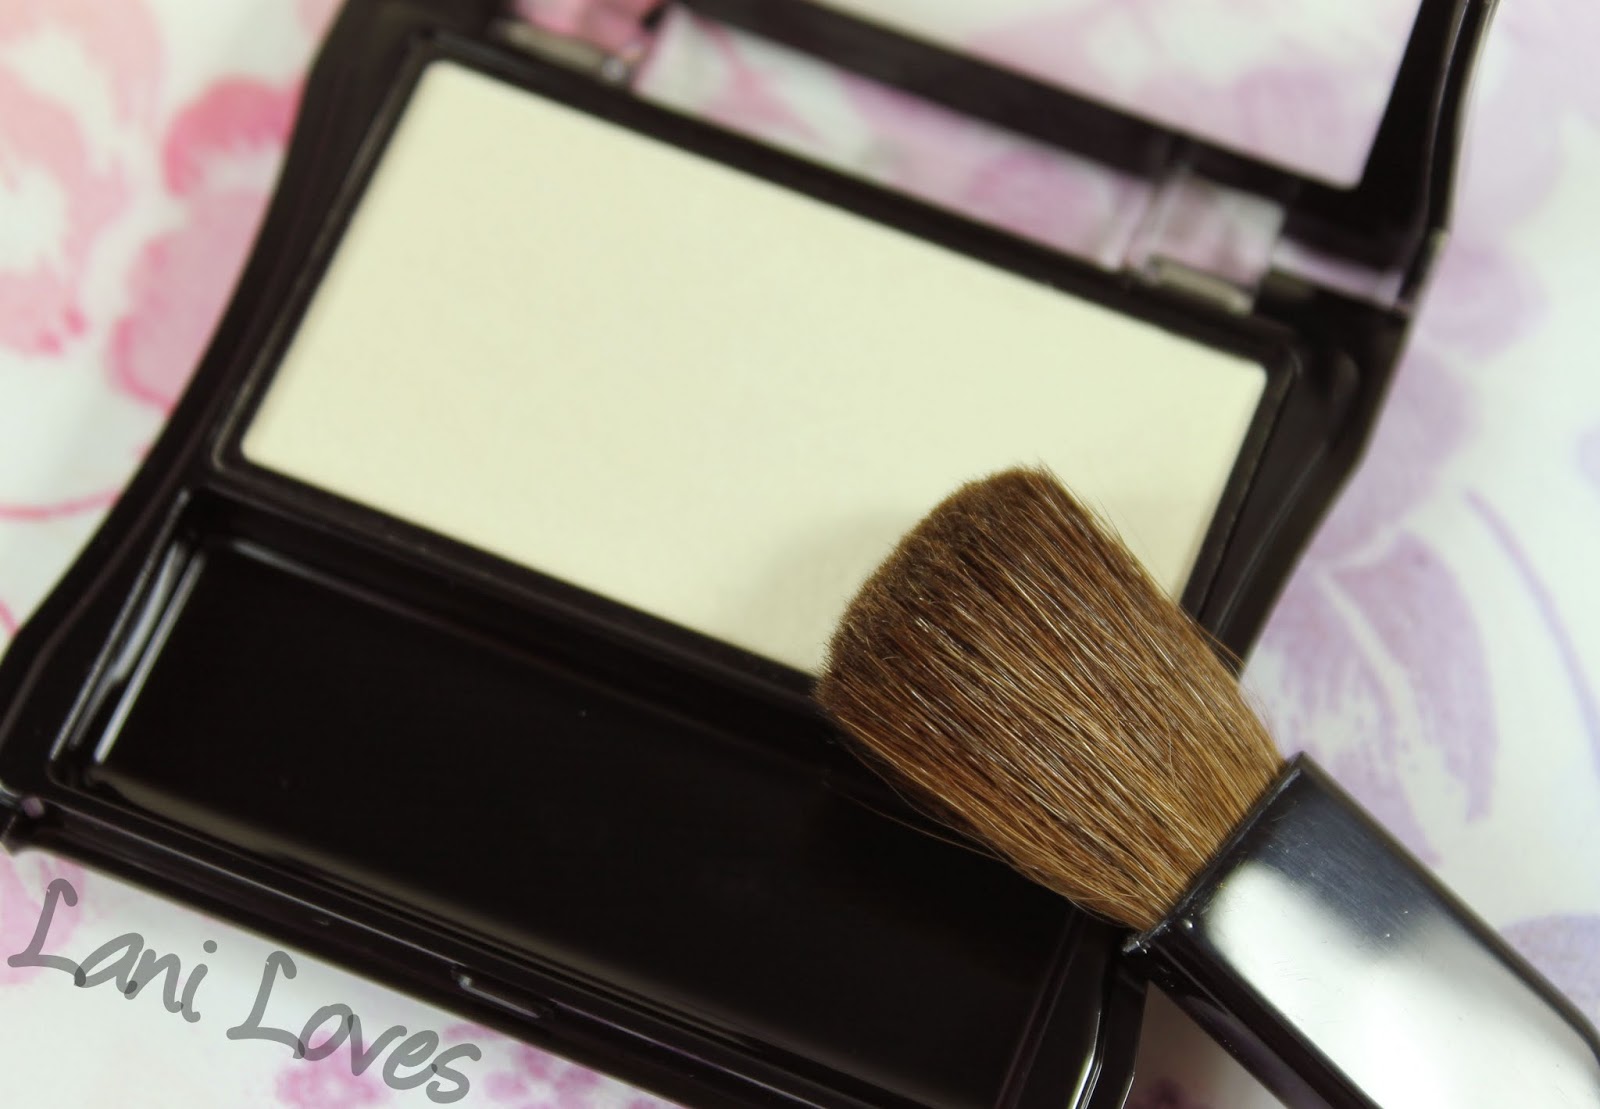 ZA Cheeks Groovy 05 June Bride Swatches & Review